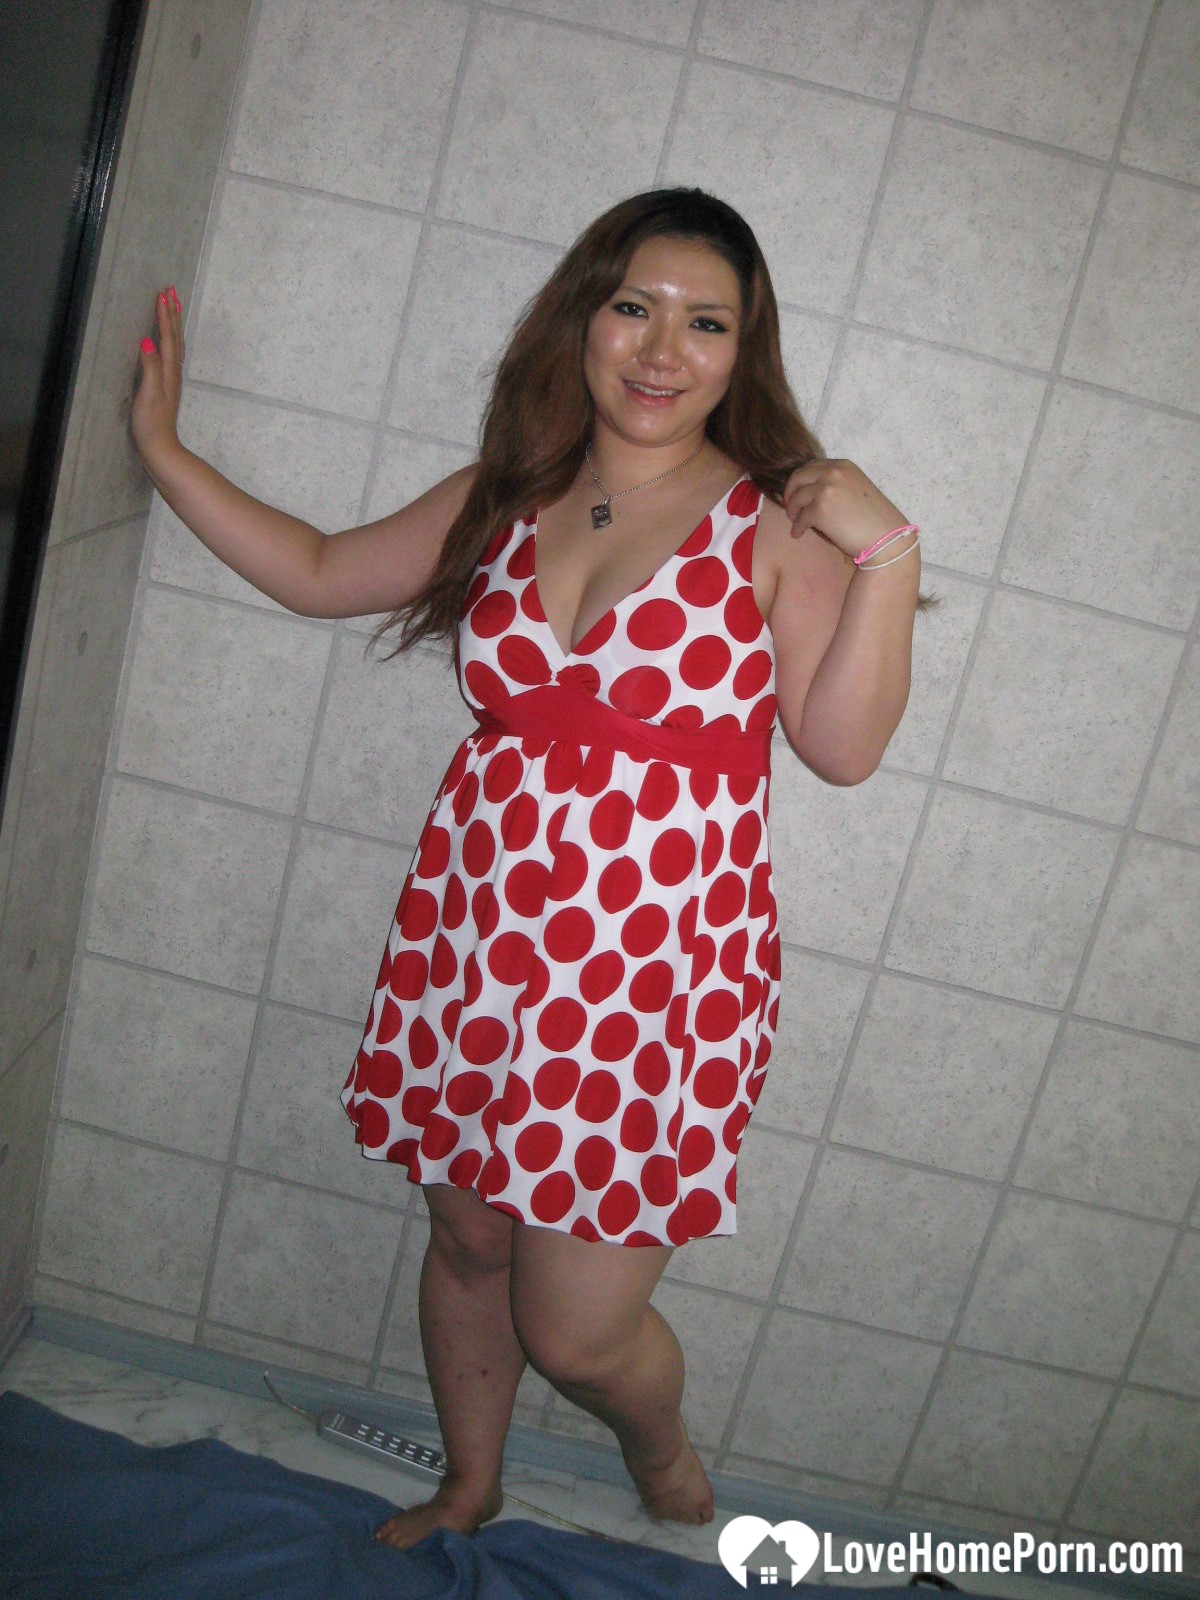 Chubby Asian shows off her hot curves